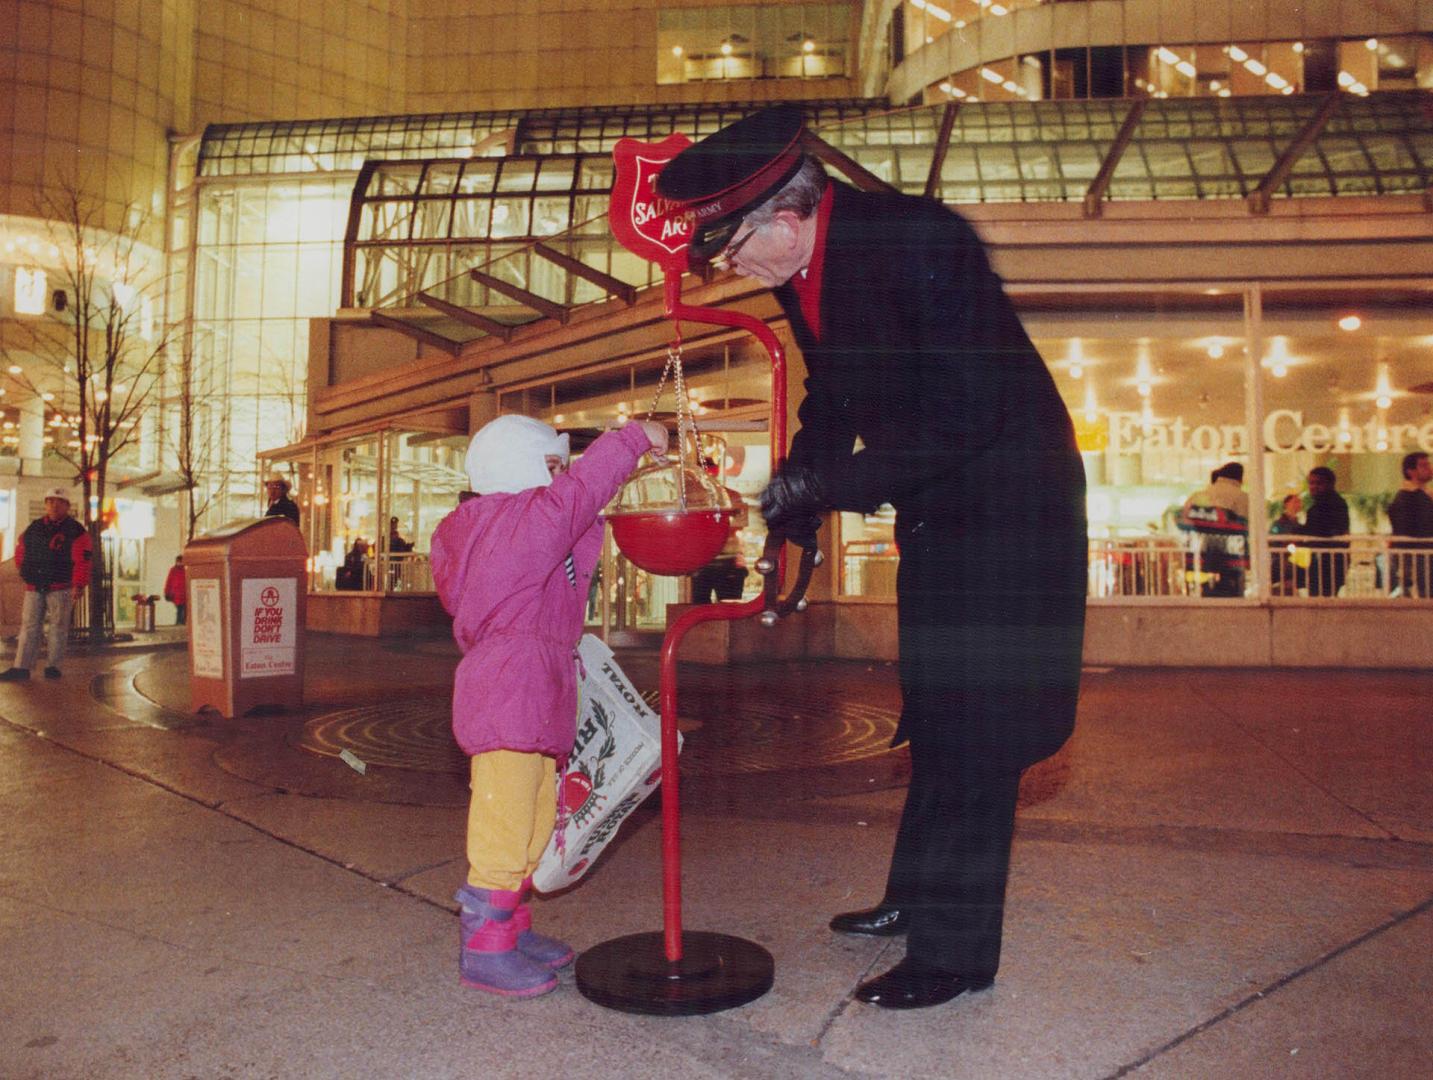 Soldier of charity: Major Hugh Tilley of the Salvation Army accepts a donation from a youngster outside the Eaton Centre